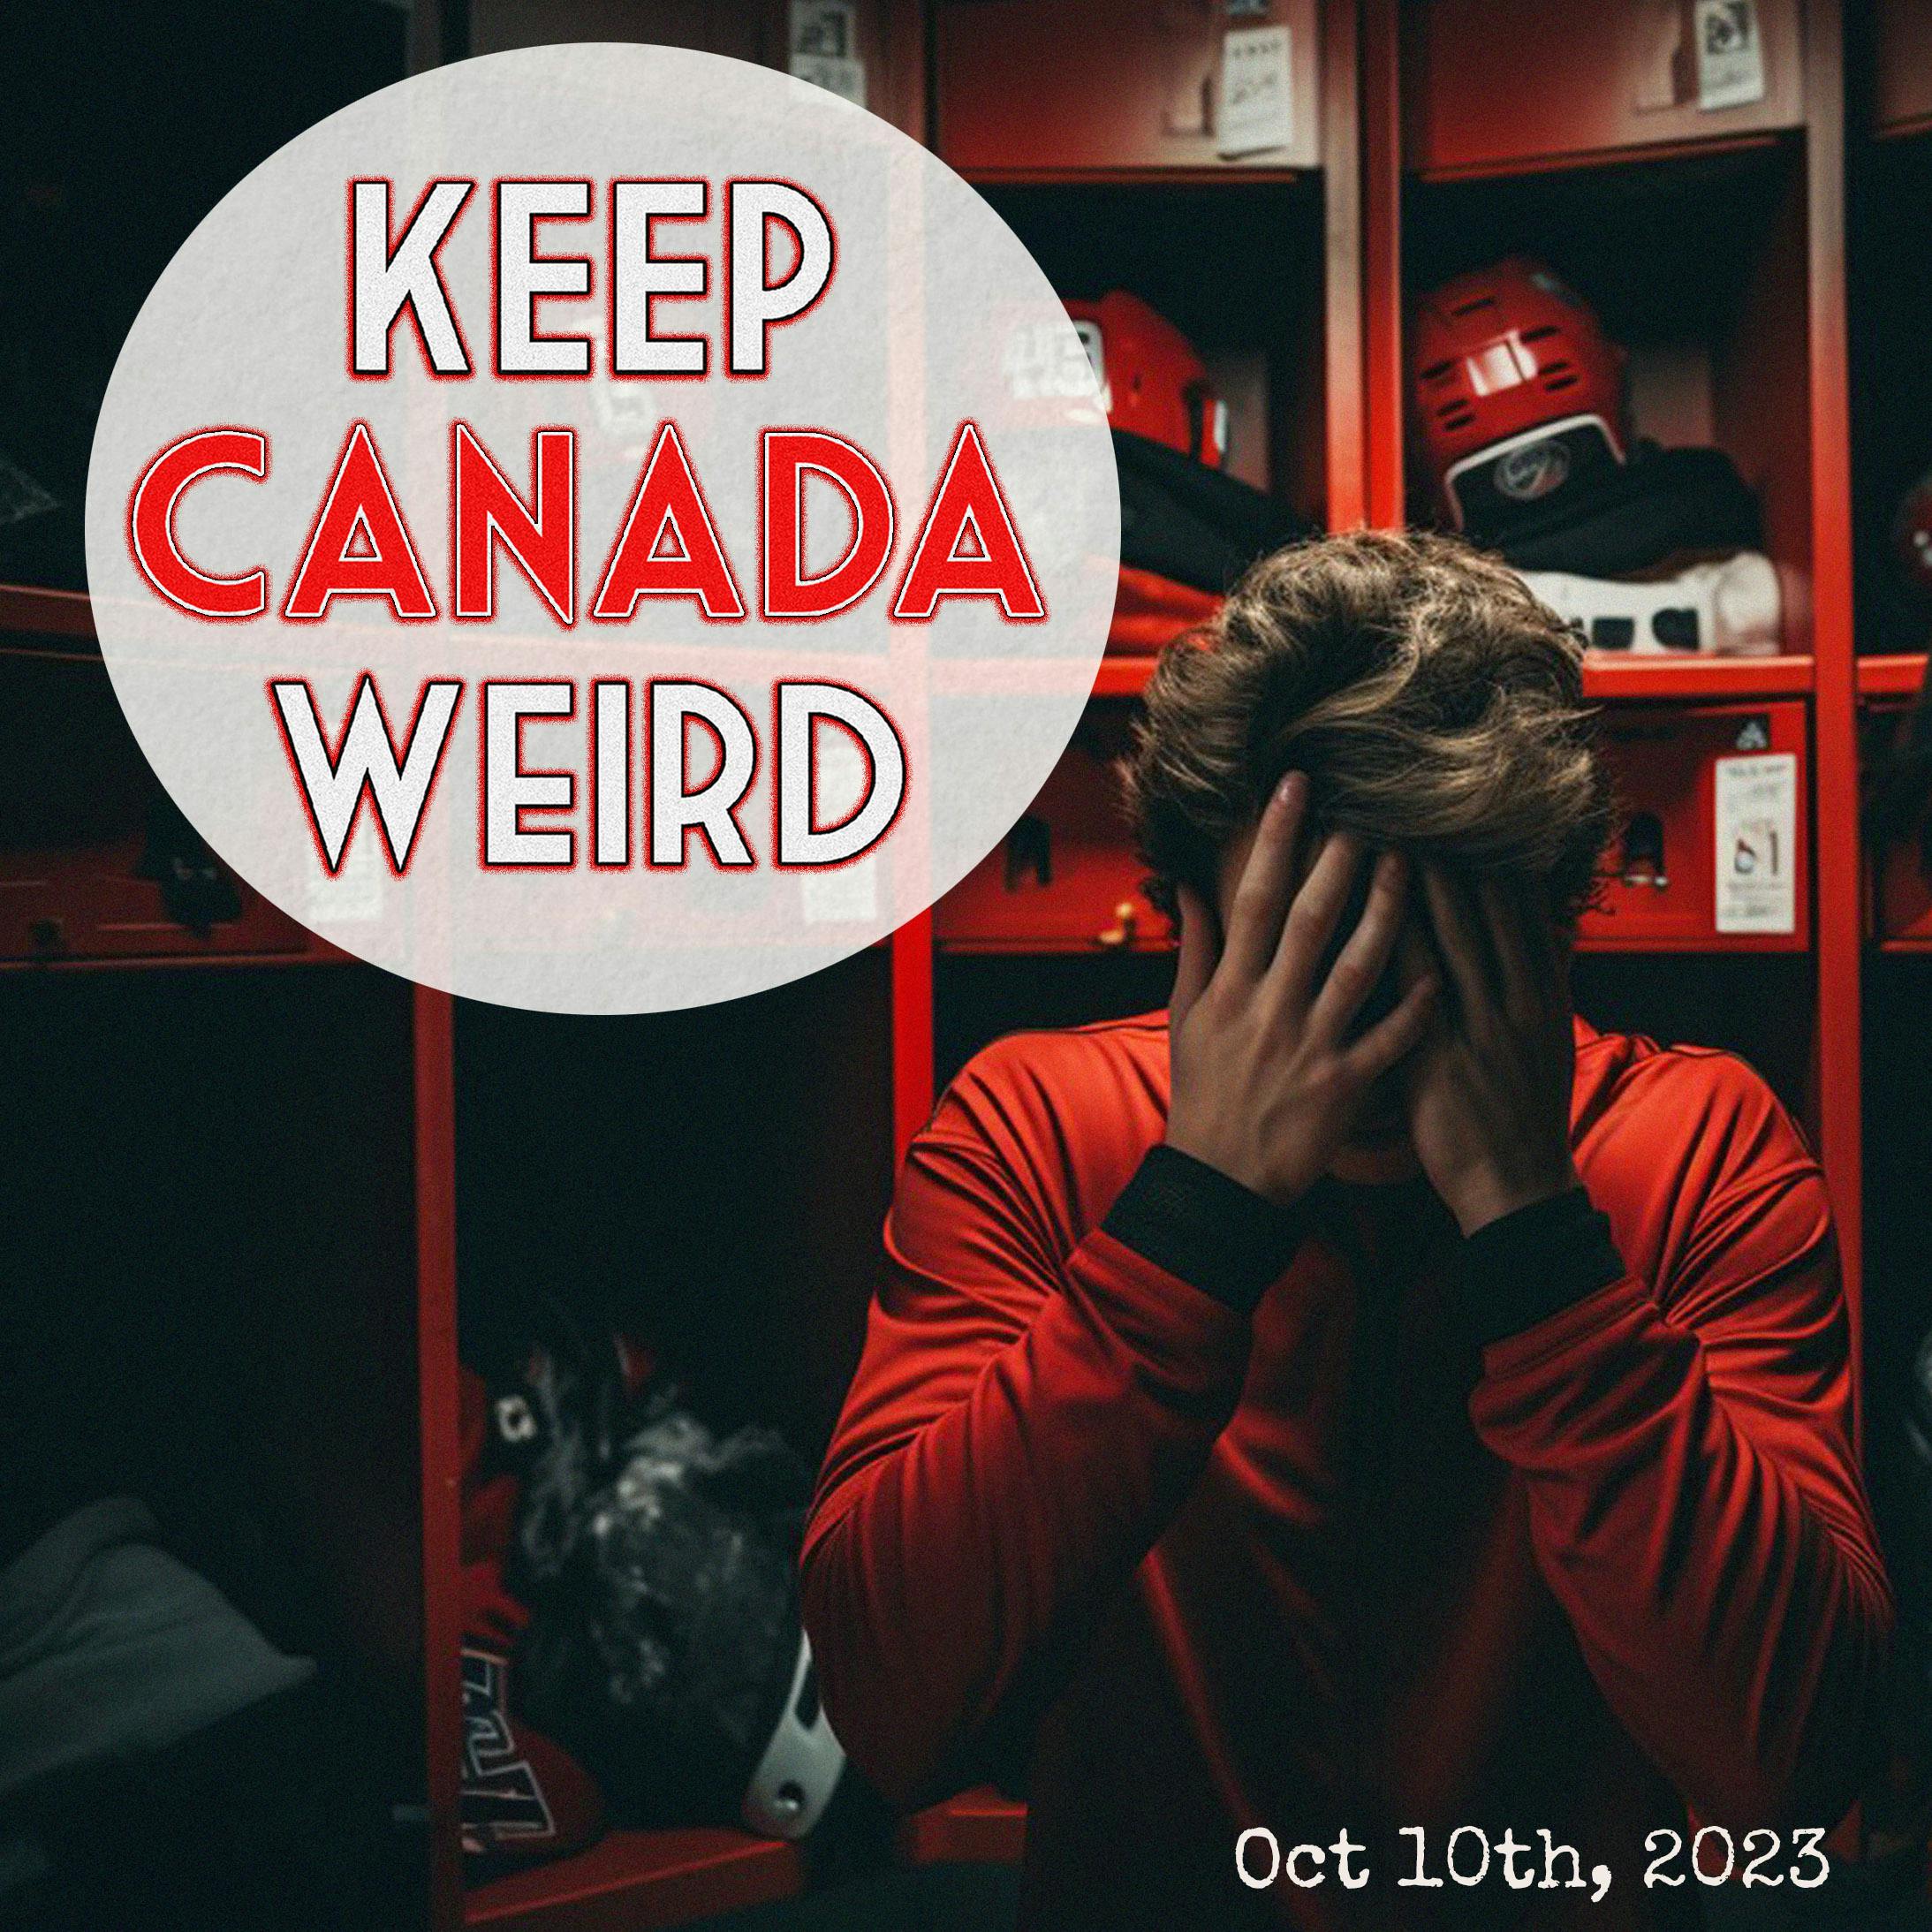 KEEP CANADA WEIRD - Oct 10th, 2023 - Bare Butts in locker rooms, Costco's Pumpkin Pie, Ugly Vegetables, card craft crap